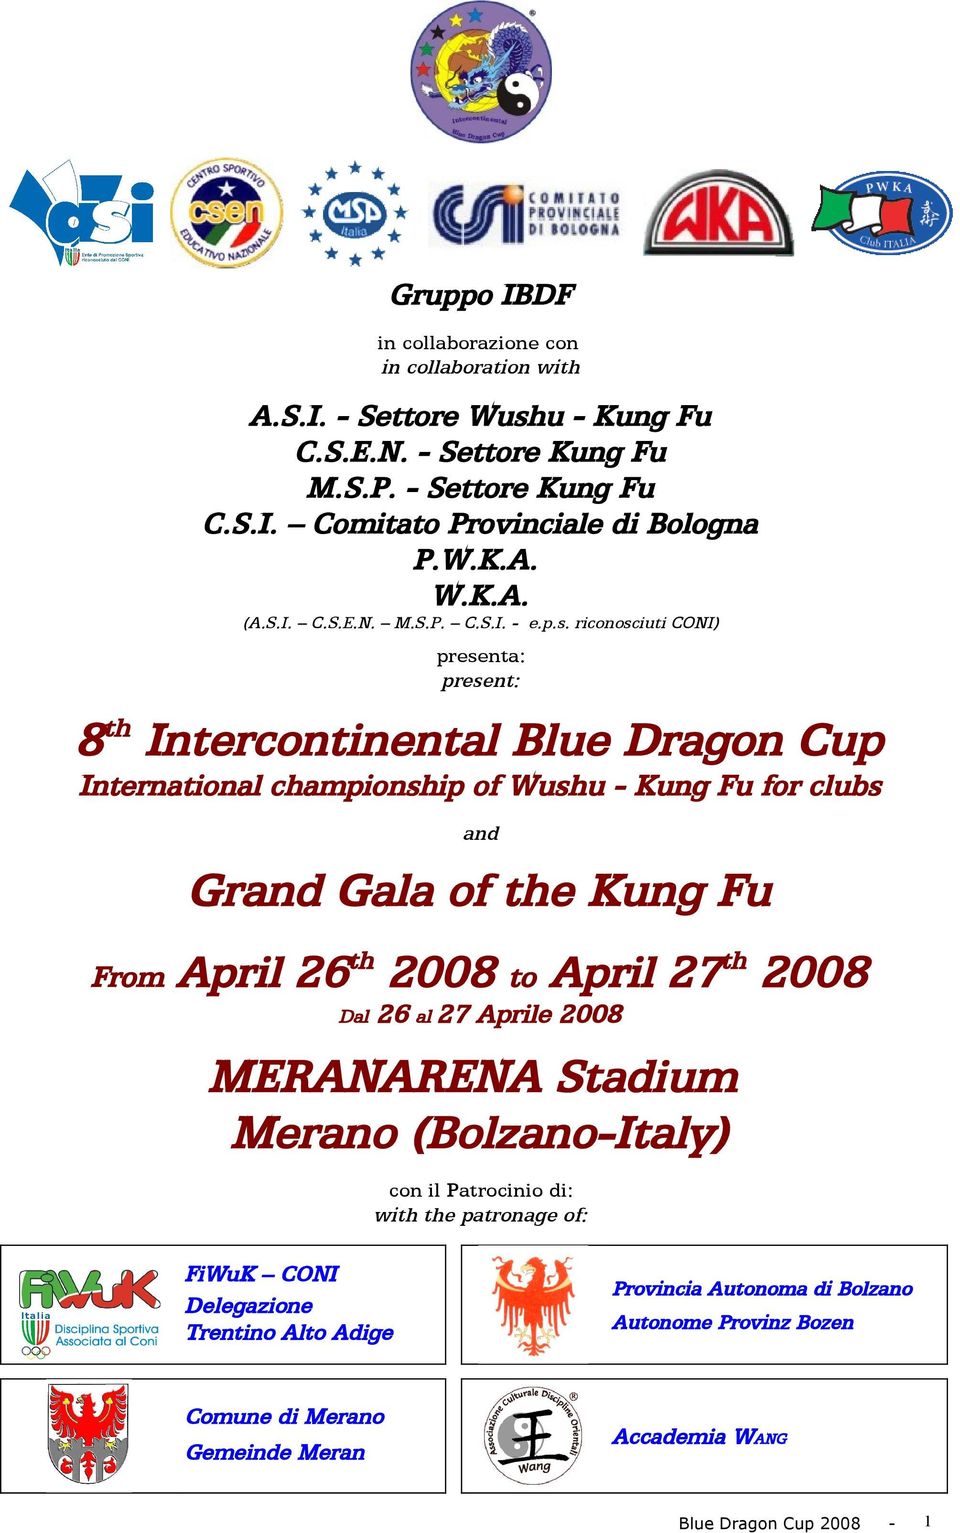 riconosciuti CONI) presenta: present: 8 th Intercontinental Blue Dragon Cup International championship of Wushu - Kung Fu for clubs and Grand Gala of the Kung Fu From April 26 th